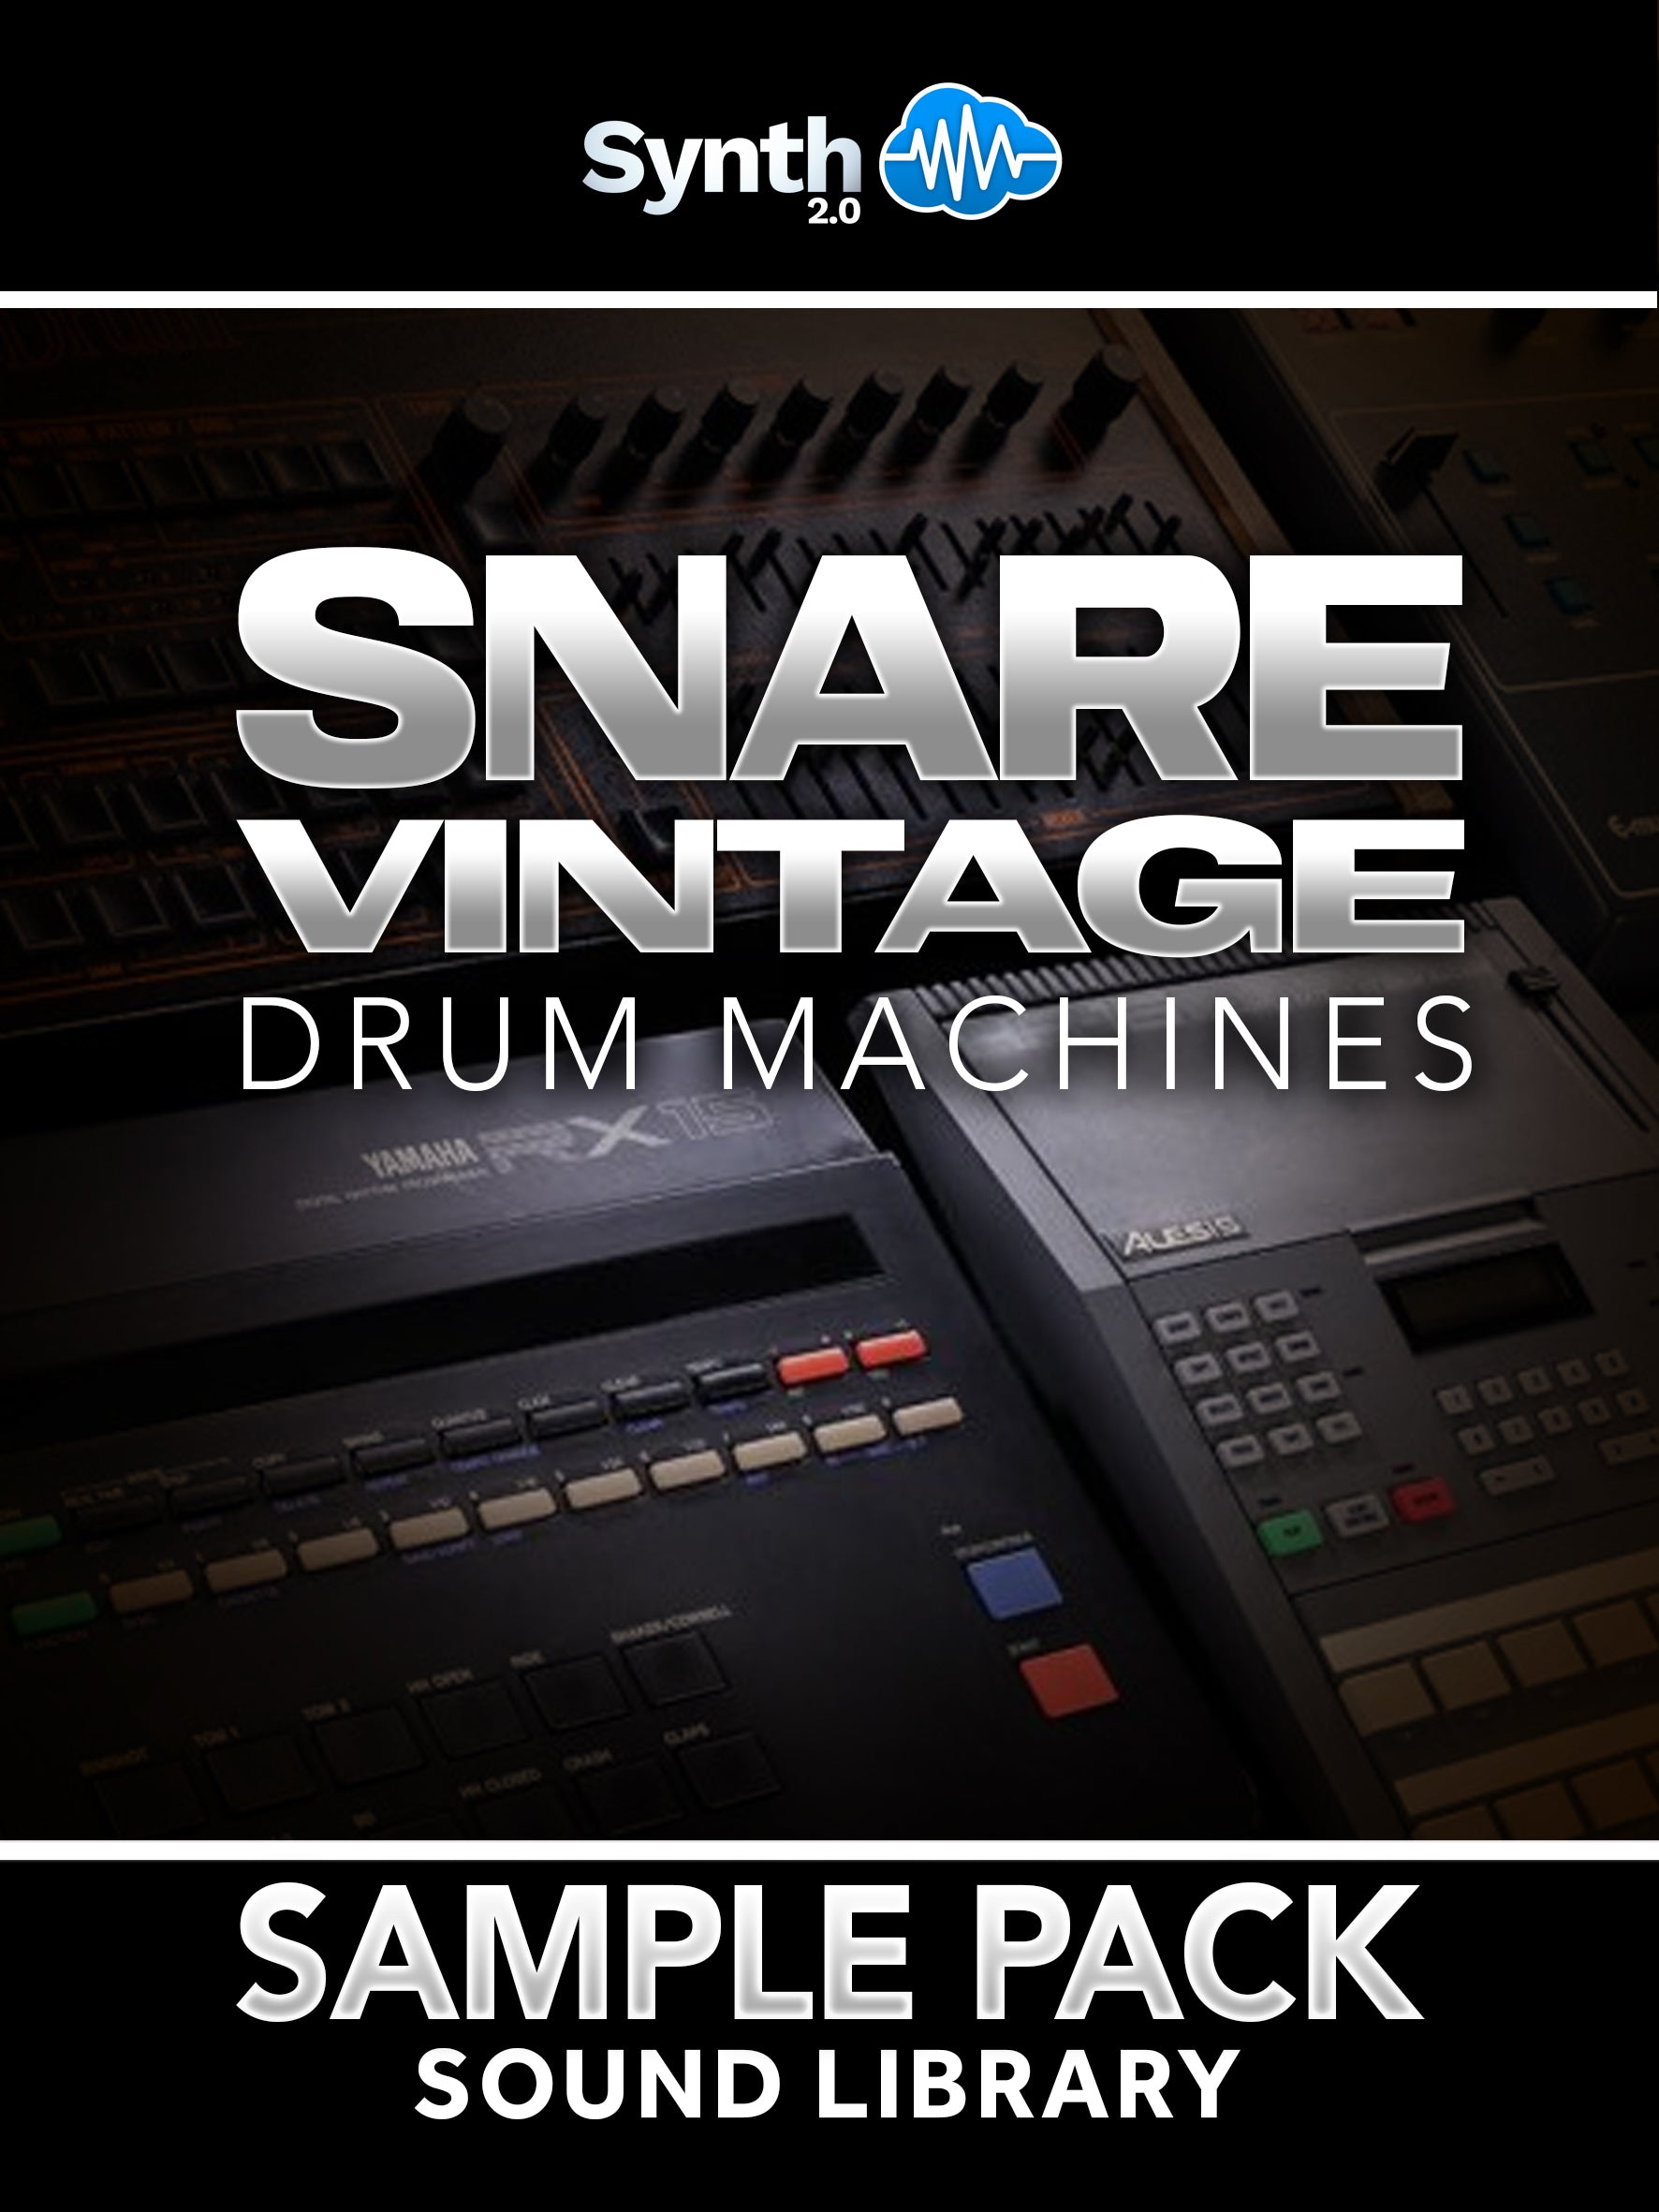 MDL002 - Snare Vintage Drum Machines with Hardware Reverbs - N.I. Battery 4